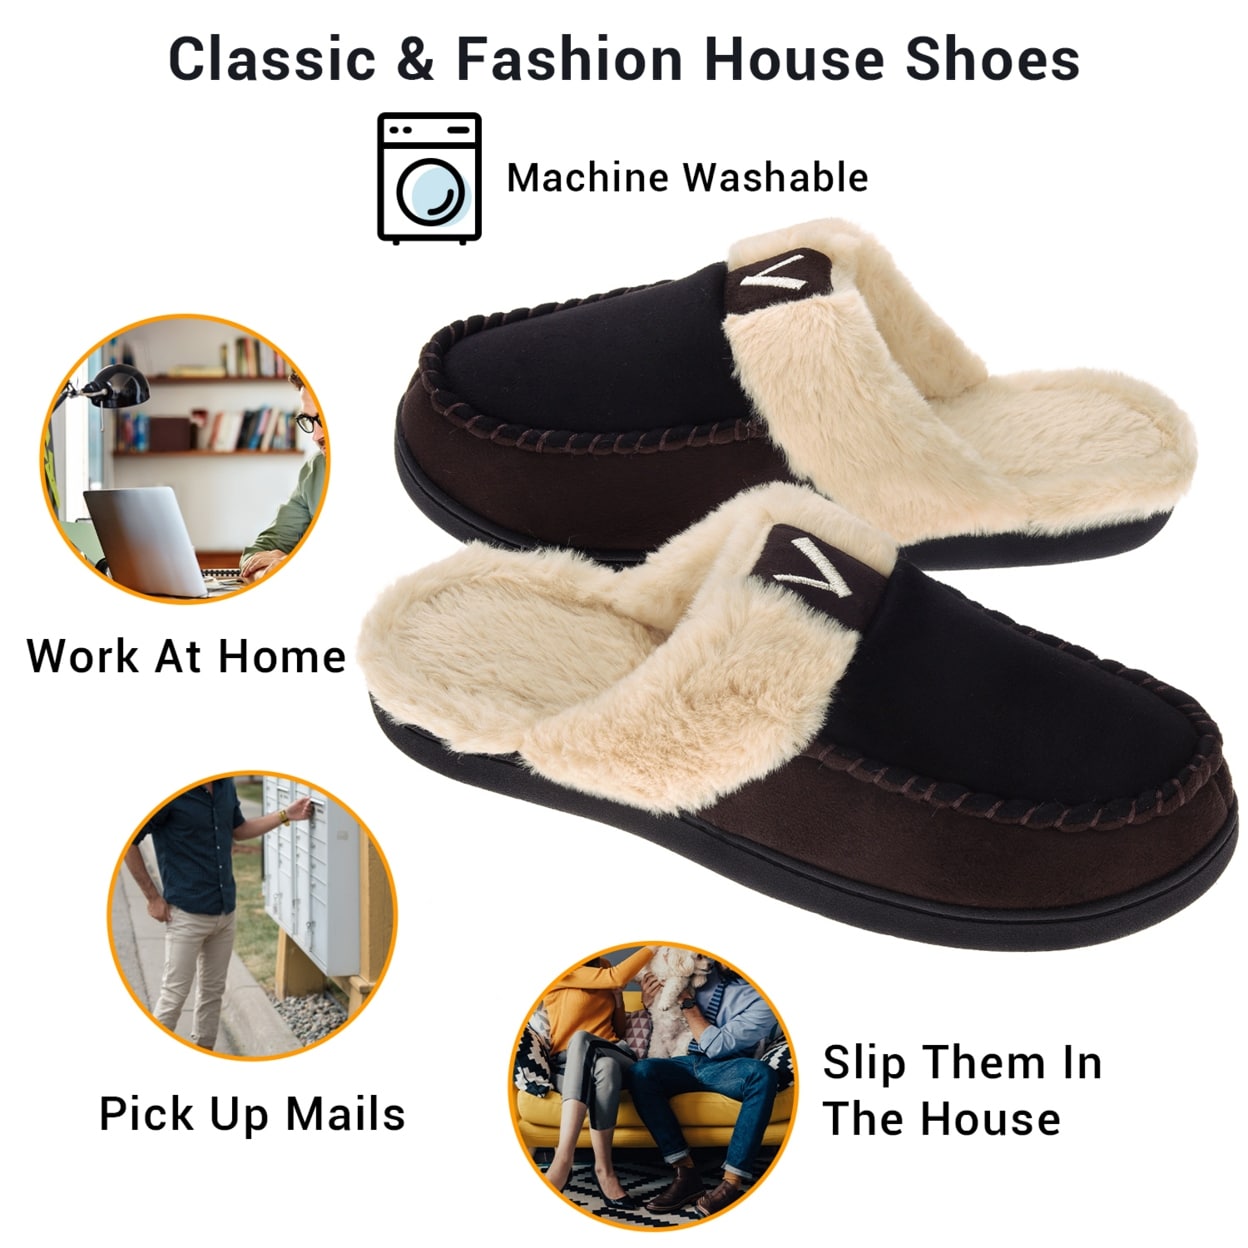 house shoes with fur